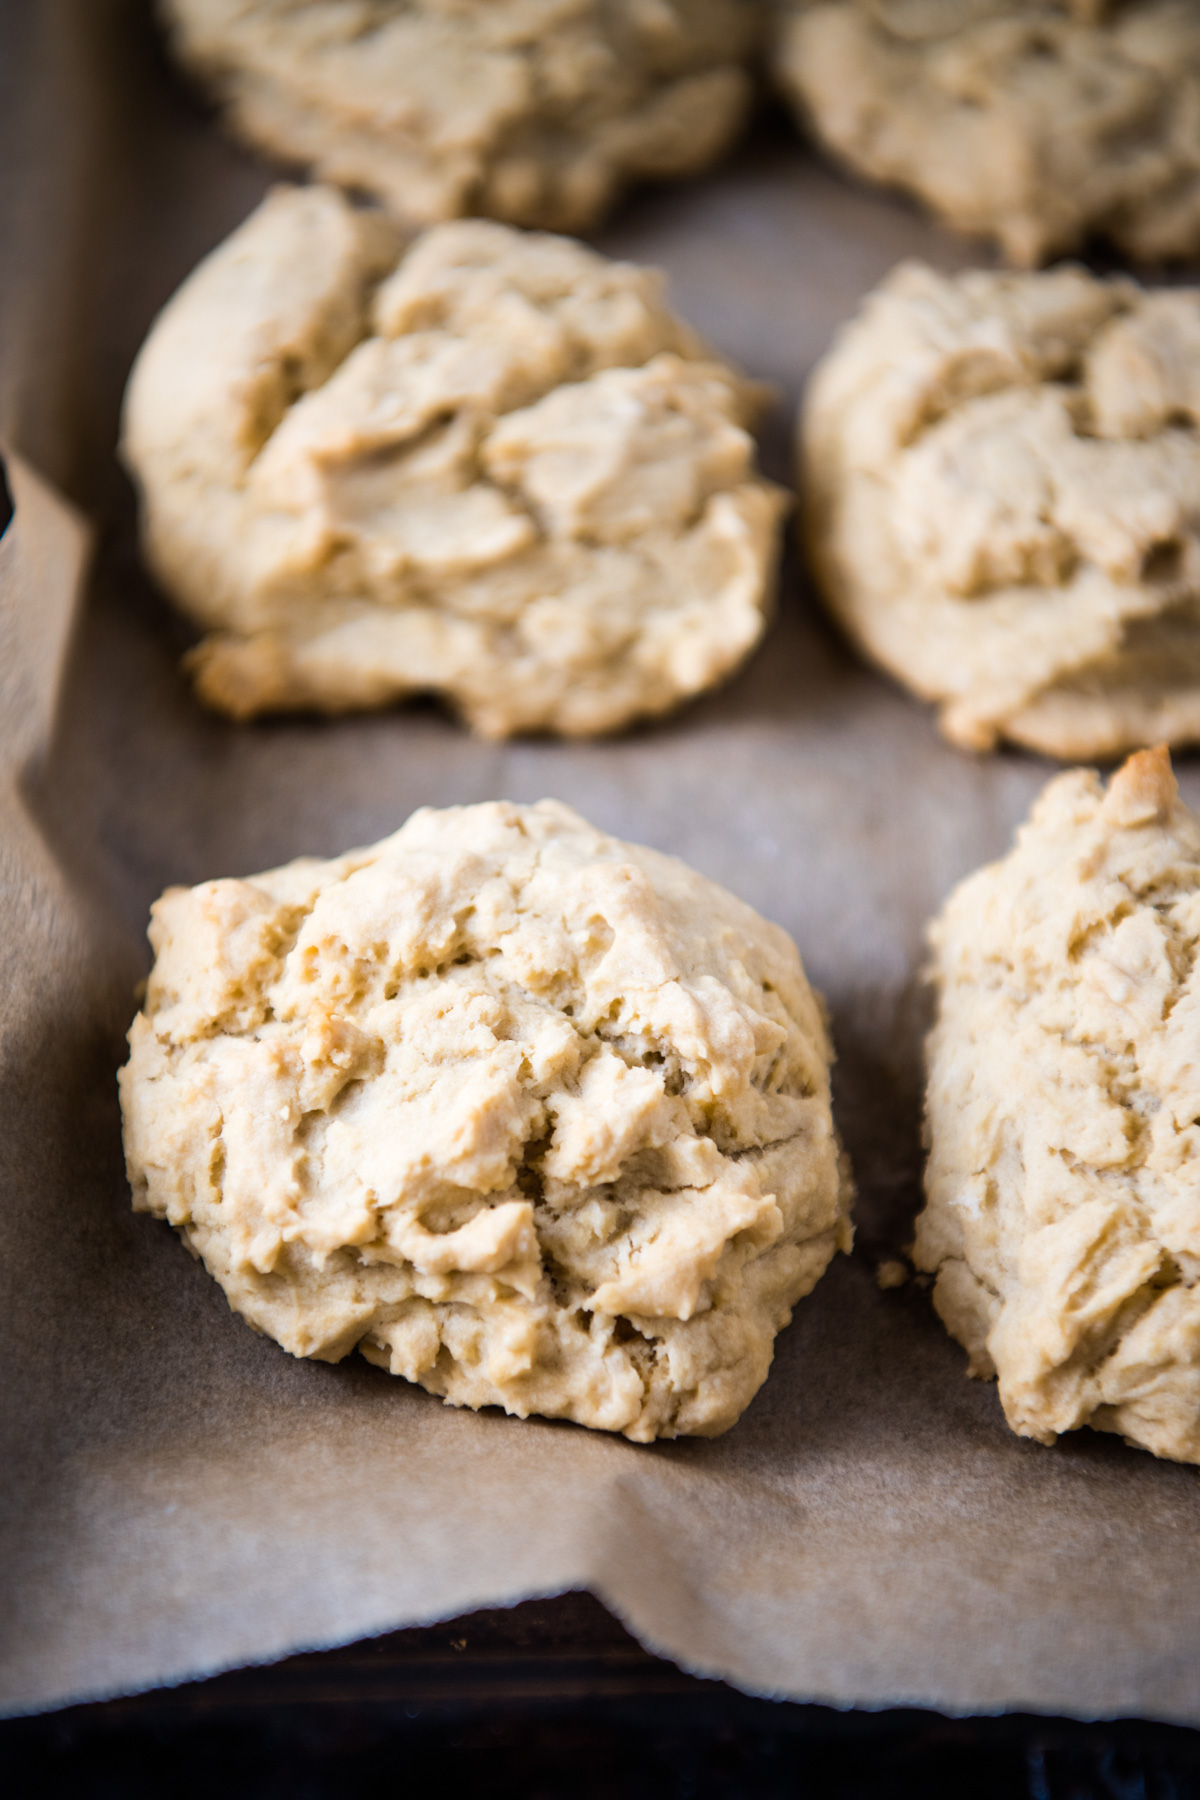 baked gluten-free biscuits dropped onto parchment paper covered baking sheet